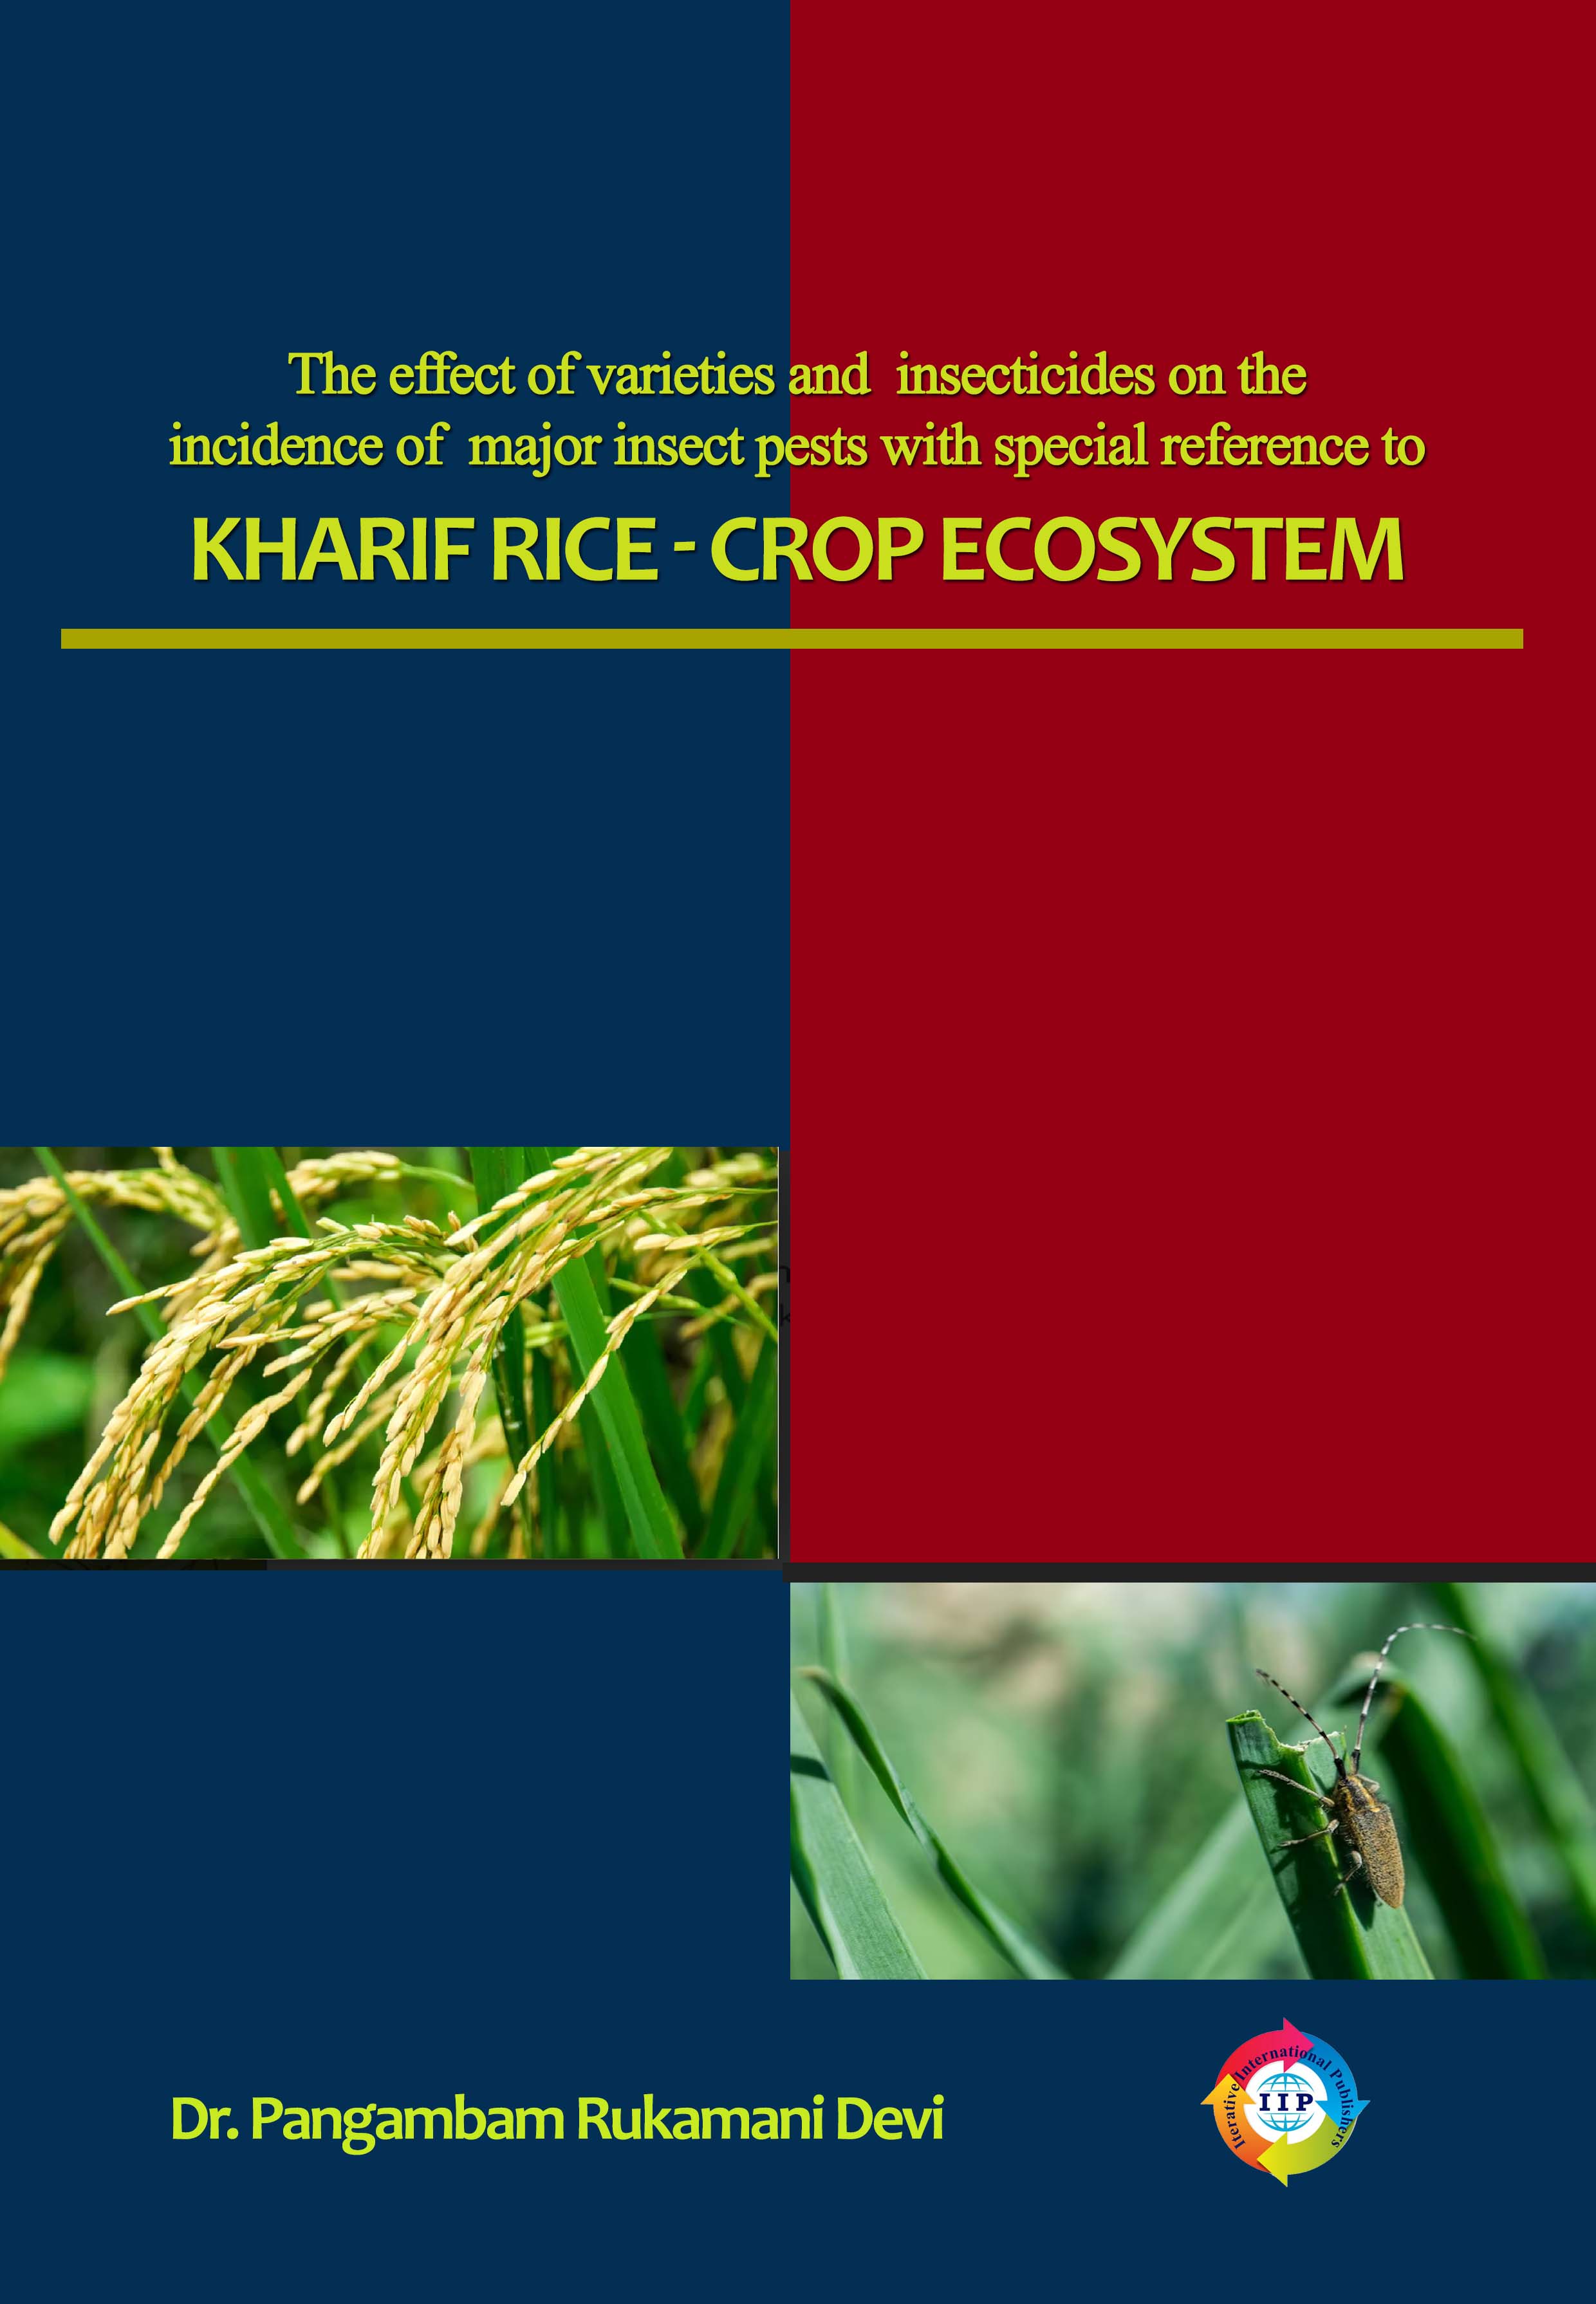 THE EFFECT OF VARIETIES AND INSECTICIDES ON THE INCIDENCE OF MAJOR INSECT PESTS WITH SPECIAL REFERENCE TO KHARIF RICE-CROP ECOSYSTEM